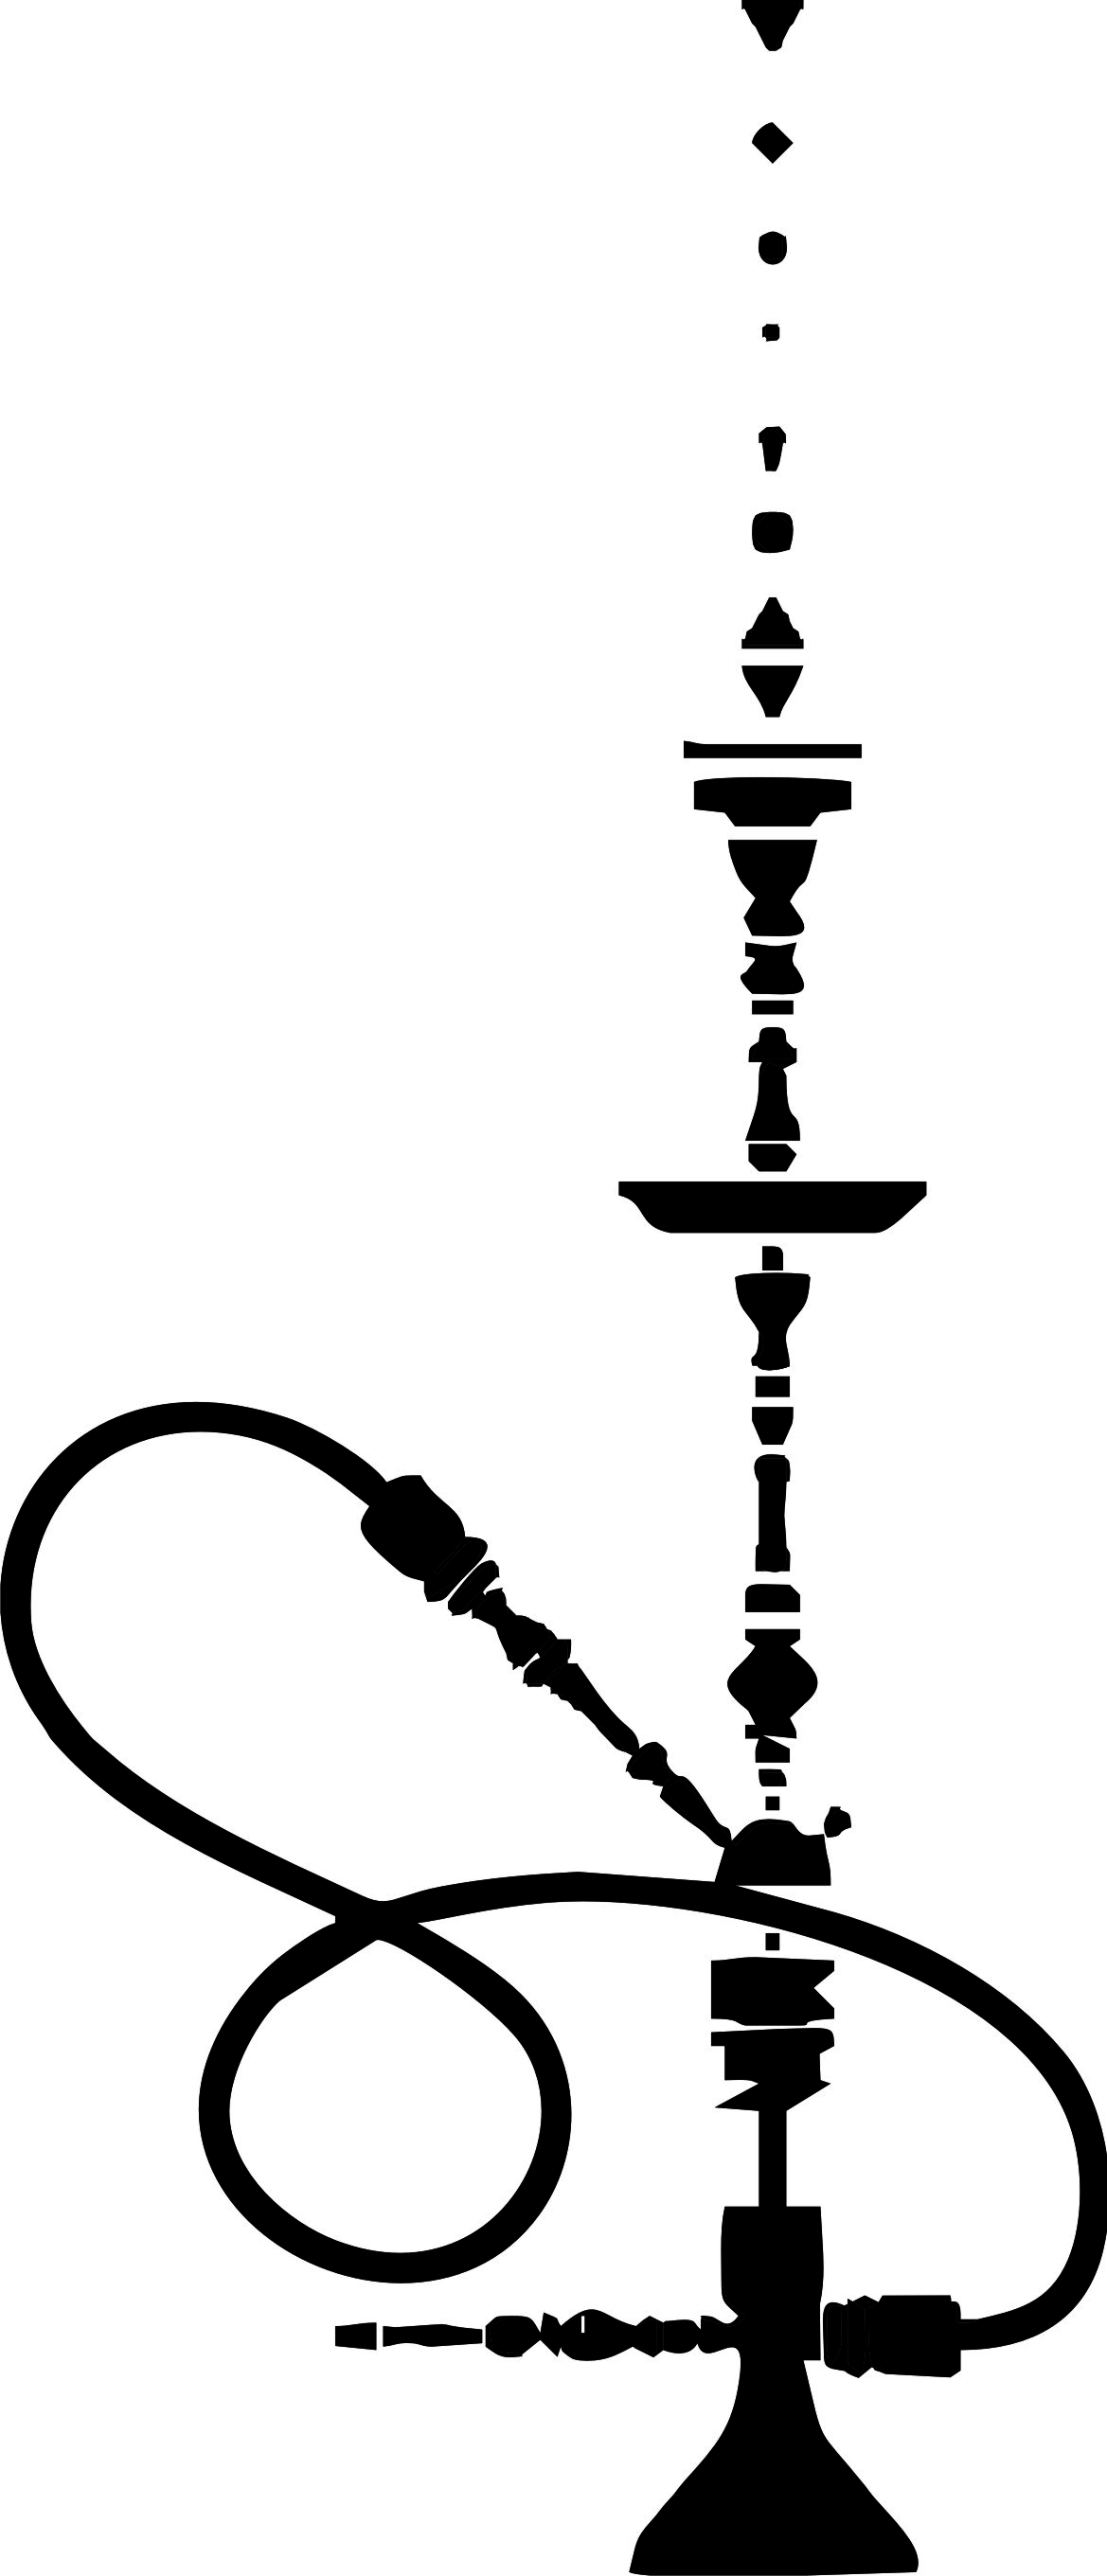 Hookah icon with phrase relax